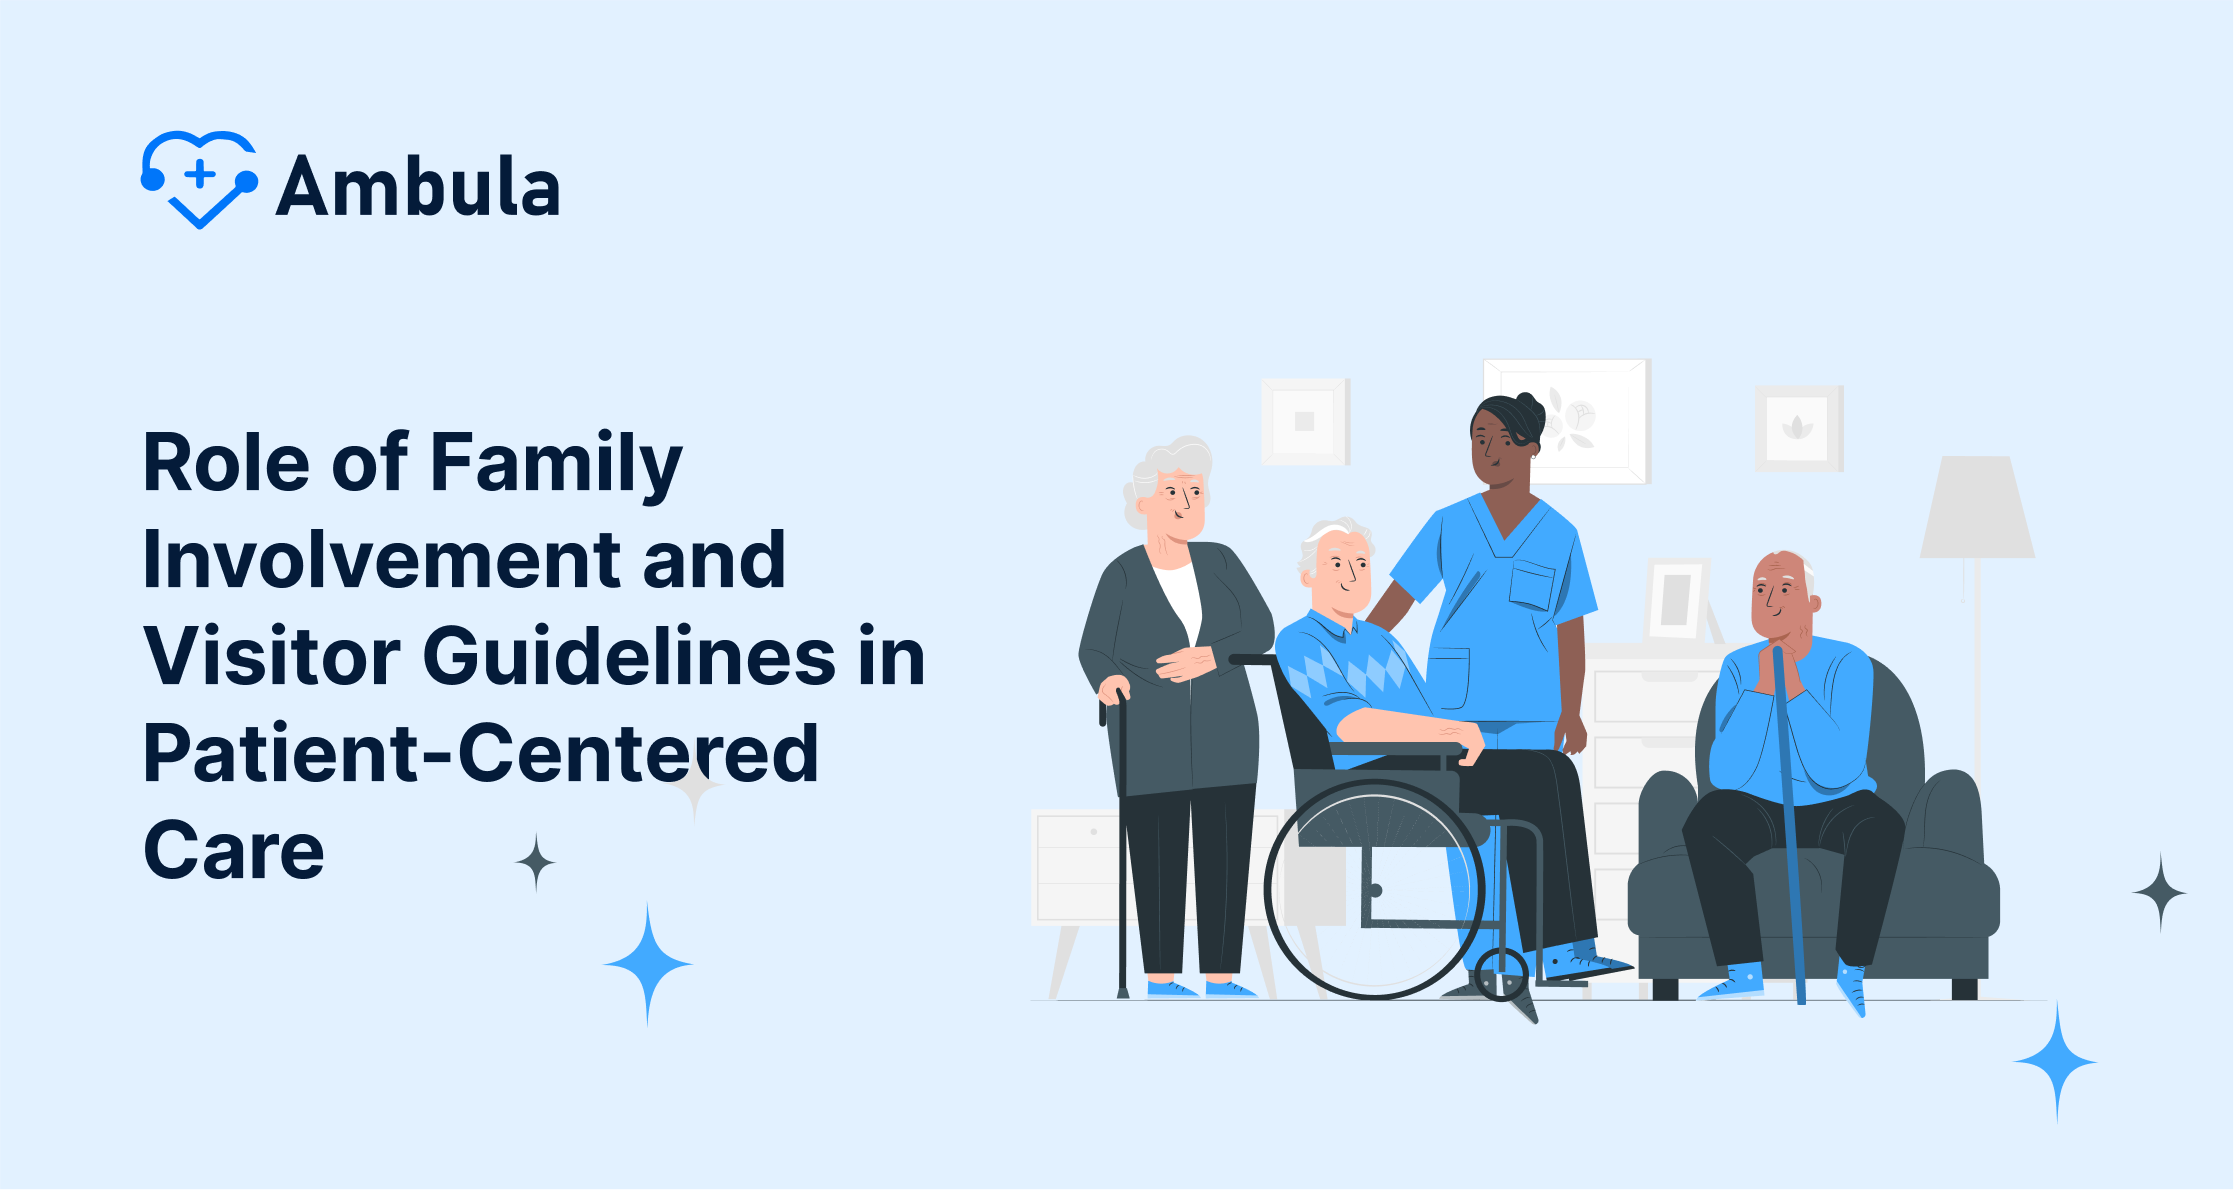 Role of Family Involvement and Visitor Guidelines in Patient-Centered Care